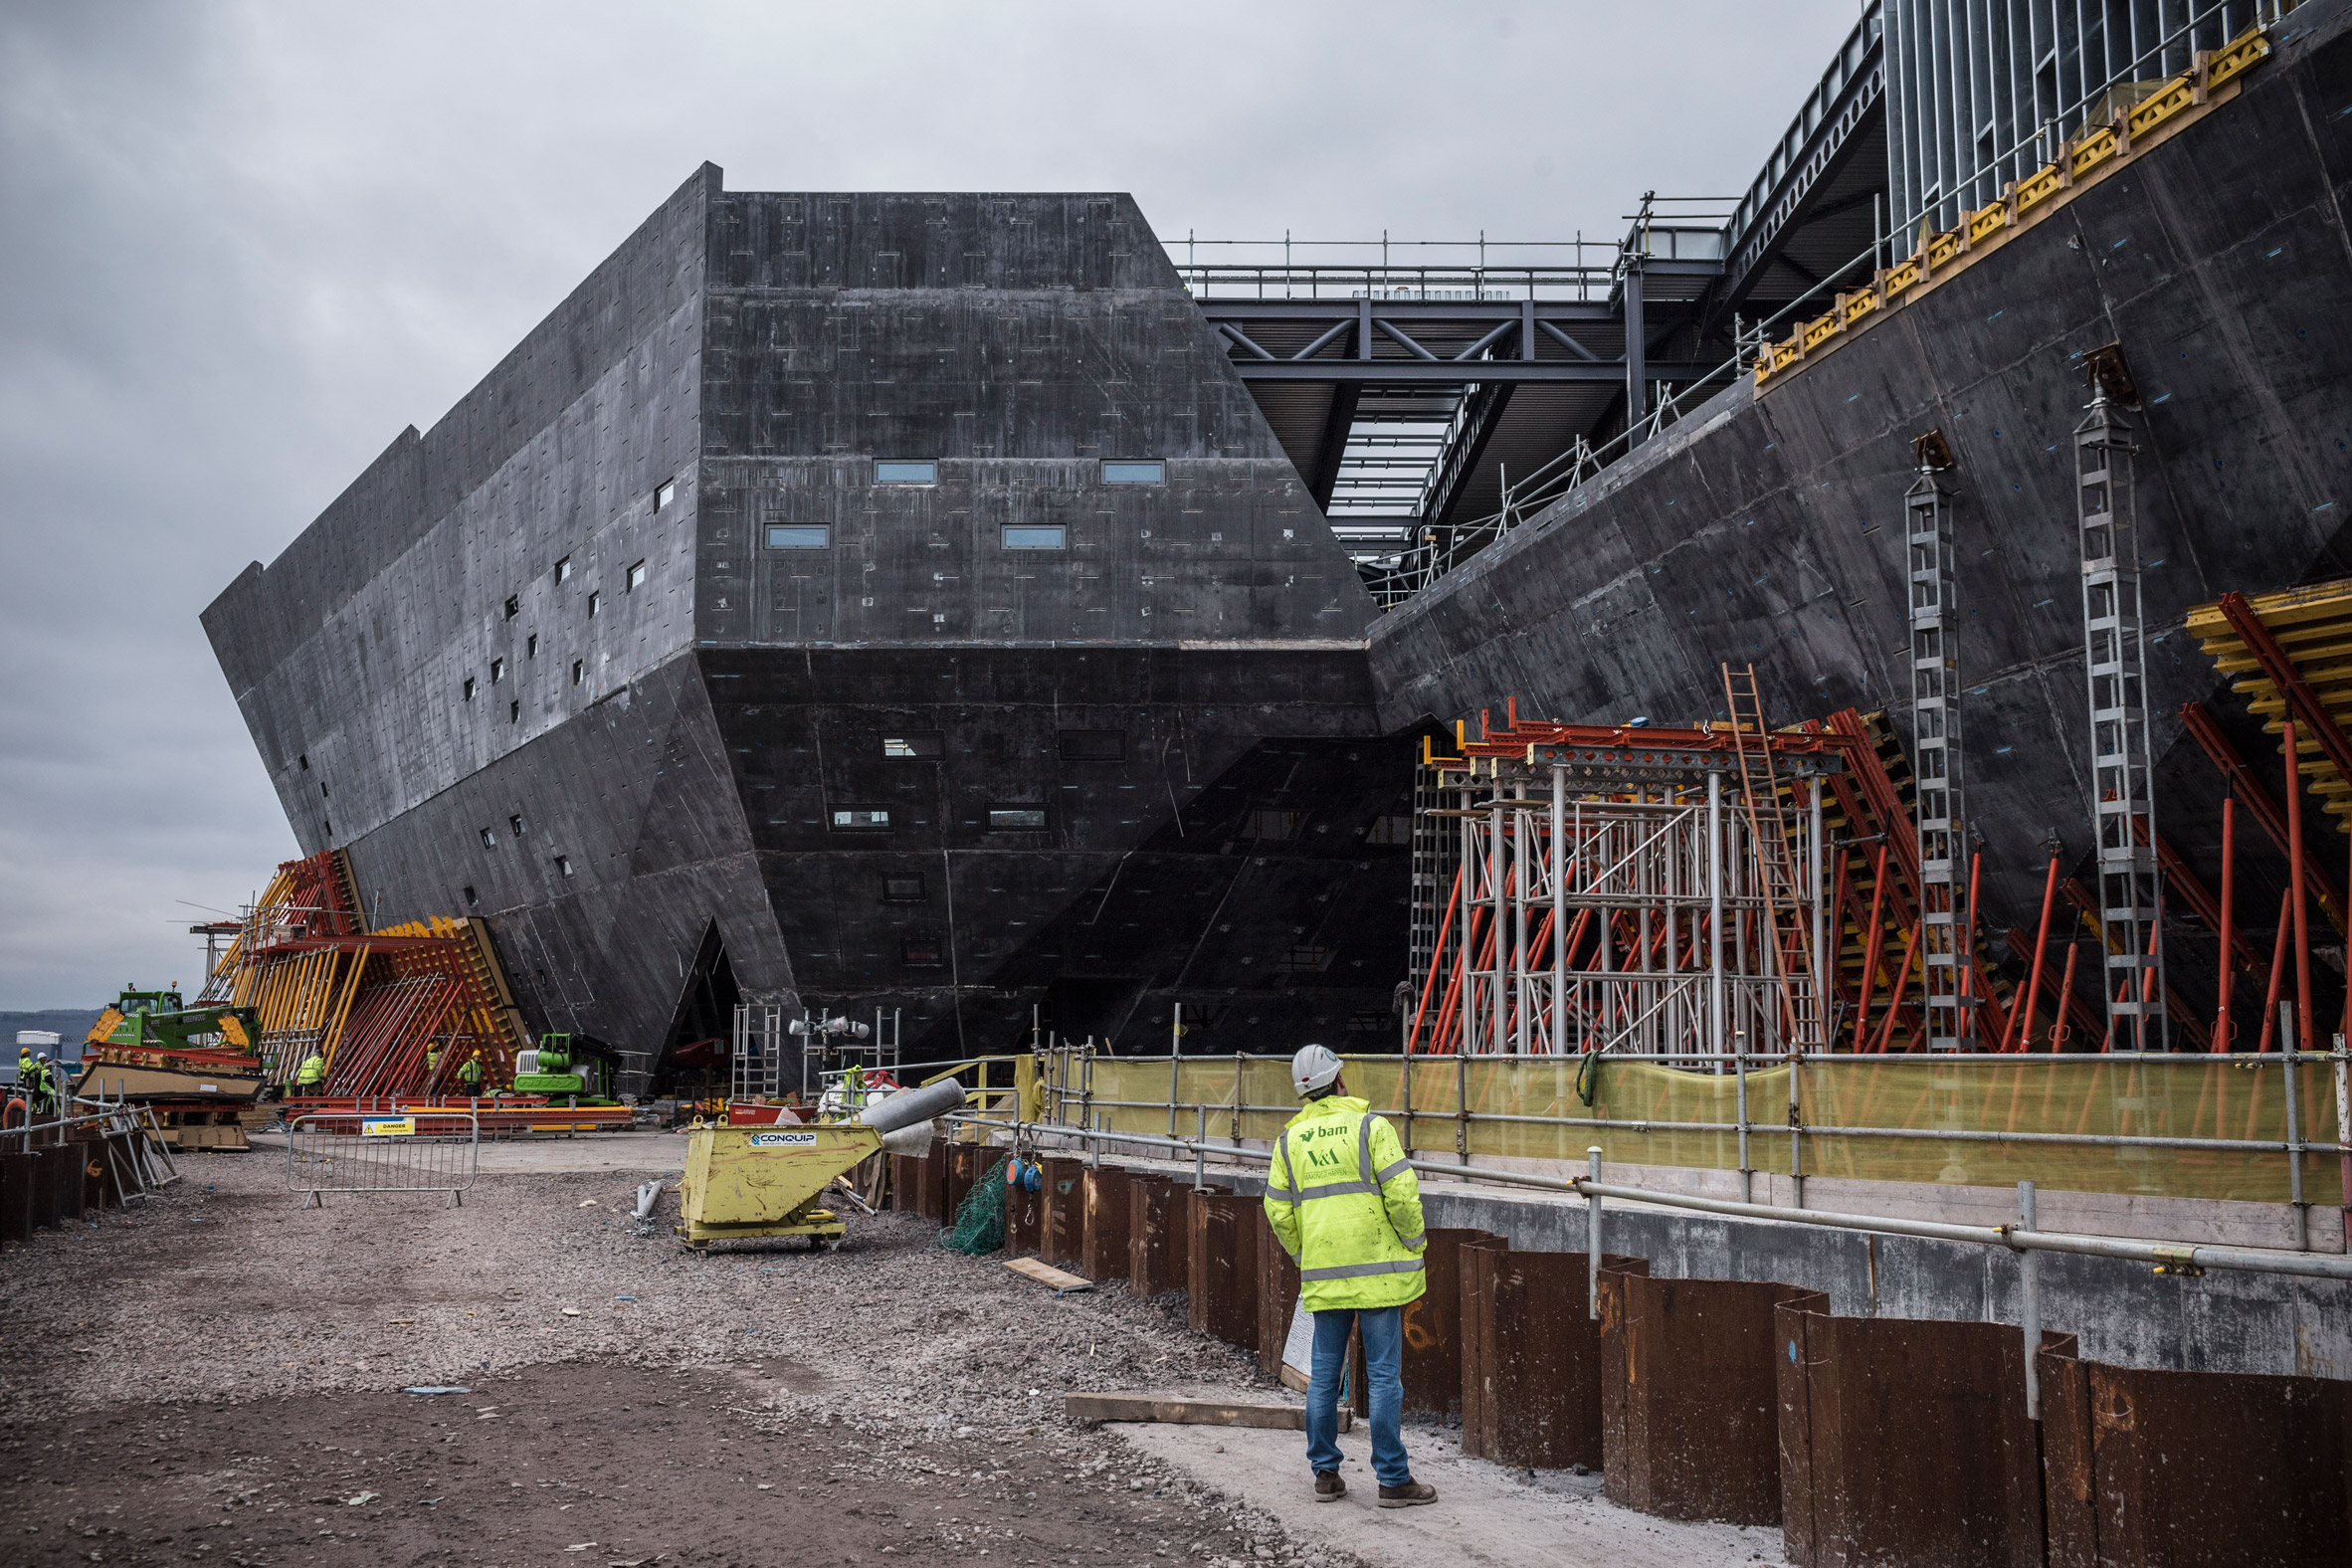 construction-v-and-a-dundee-ross-fraser-mclean-dundee-scotland-architecture-museums_dezeen_2364_col_12